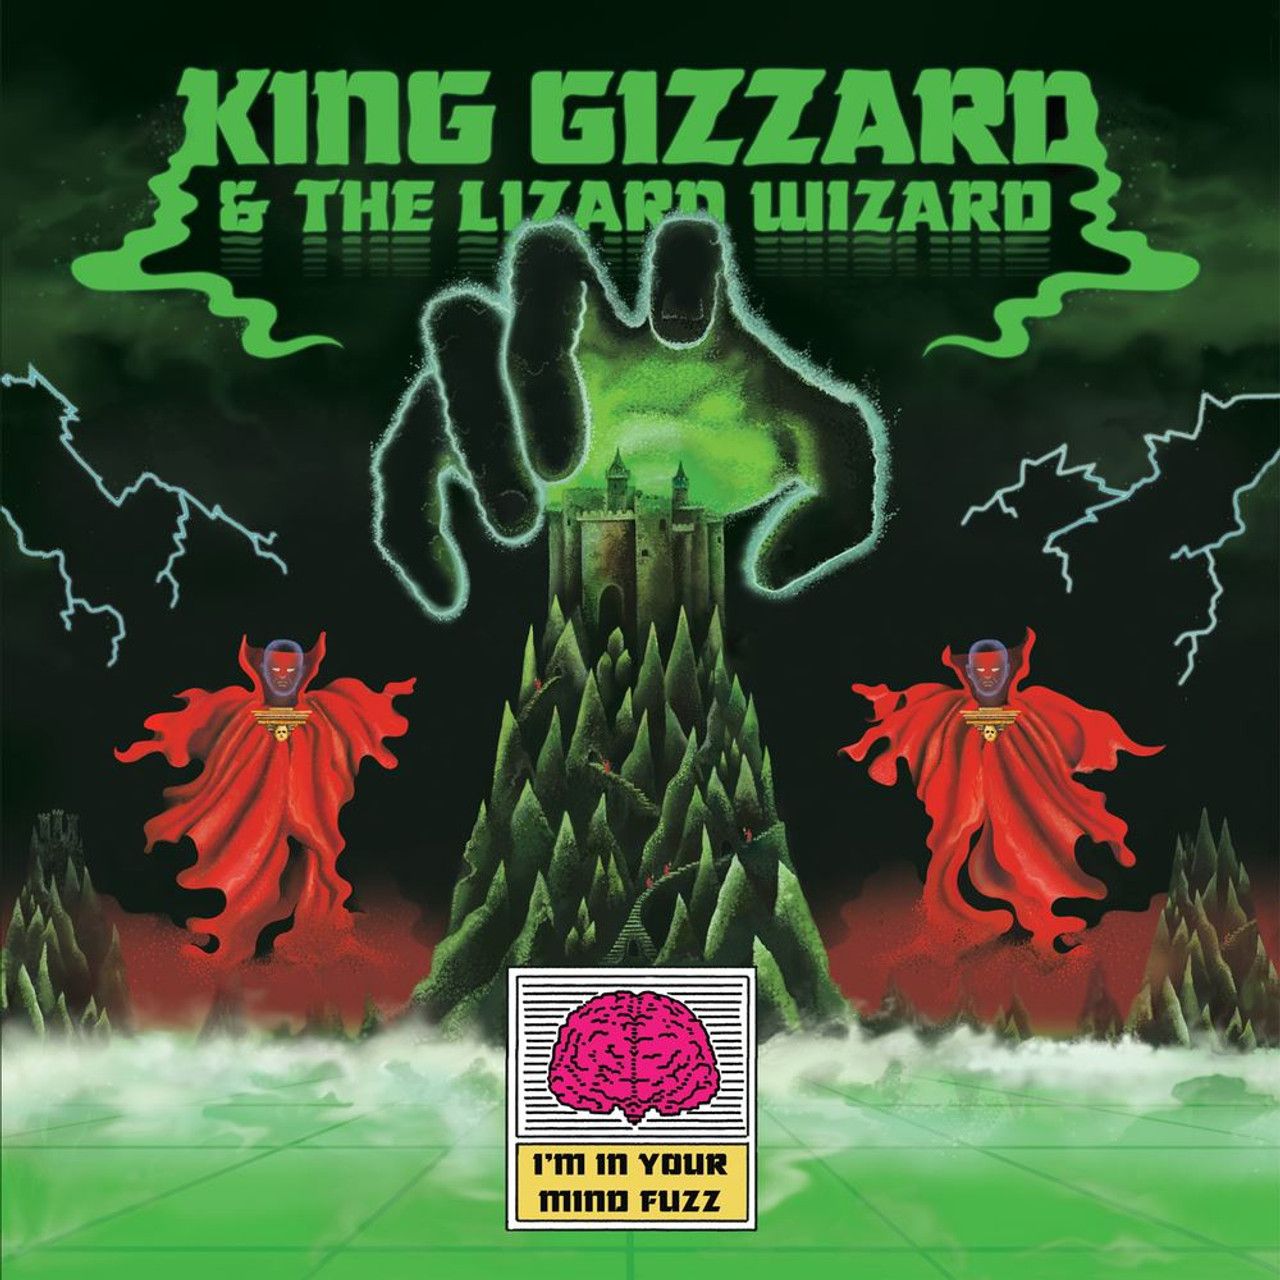 King Gizzard And The Lizard Wizard - I'm In Your Mind Fuzz (2022 Audiophile Ed. 2LP reissue) - Vinyl - New